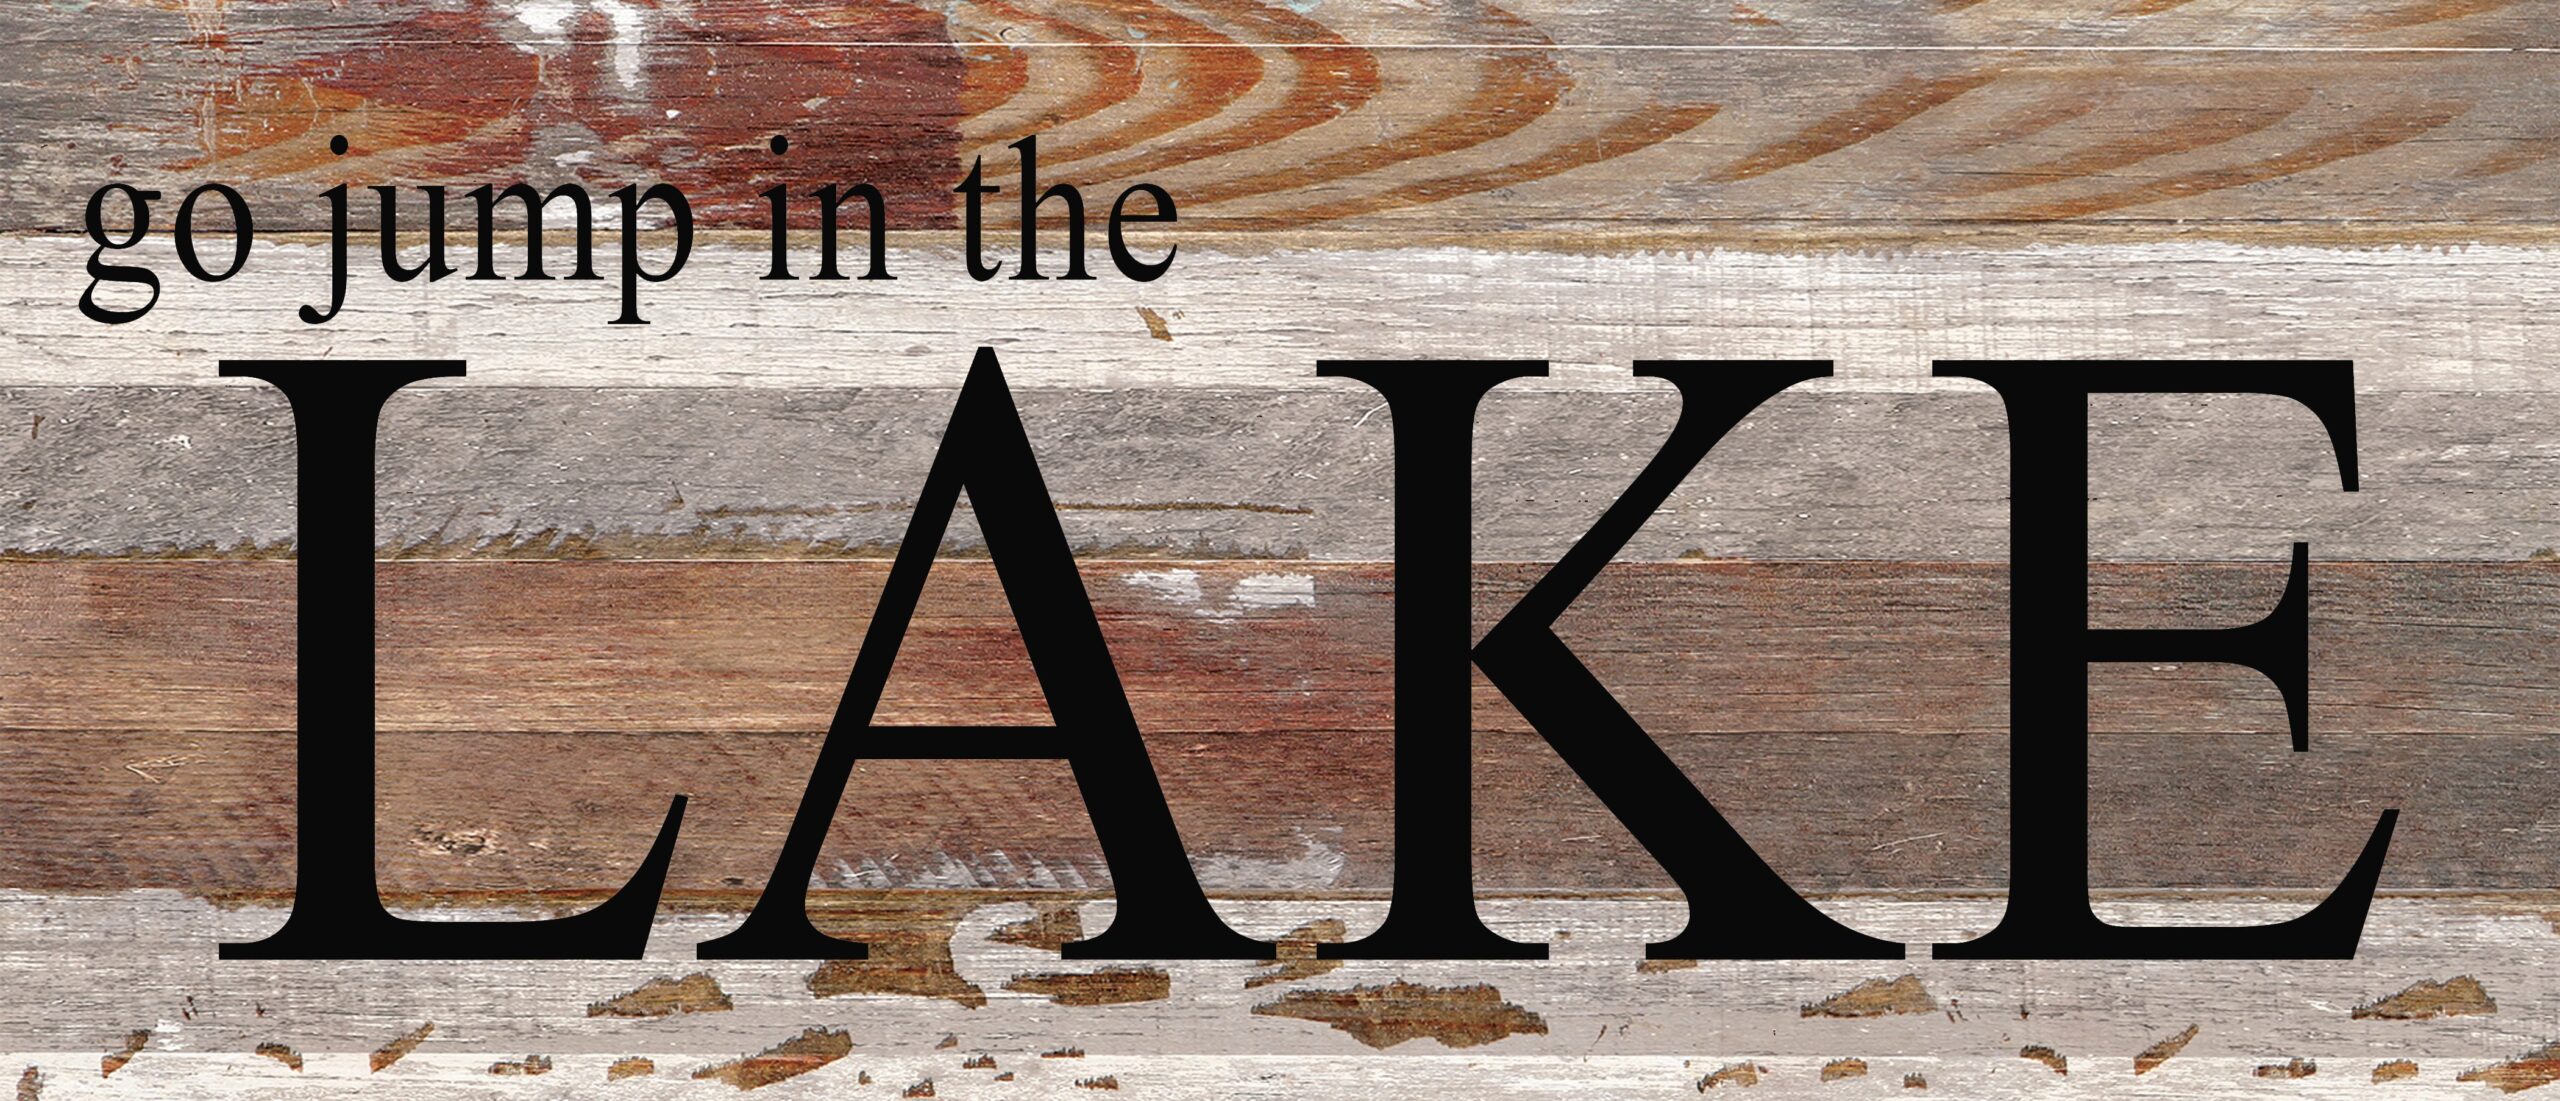 Go jump in the lake. / 14"x6" Reclaimed Wood Sign